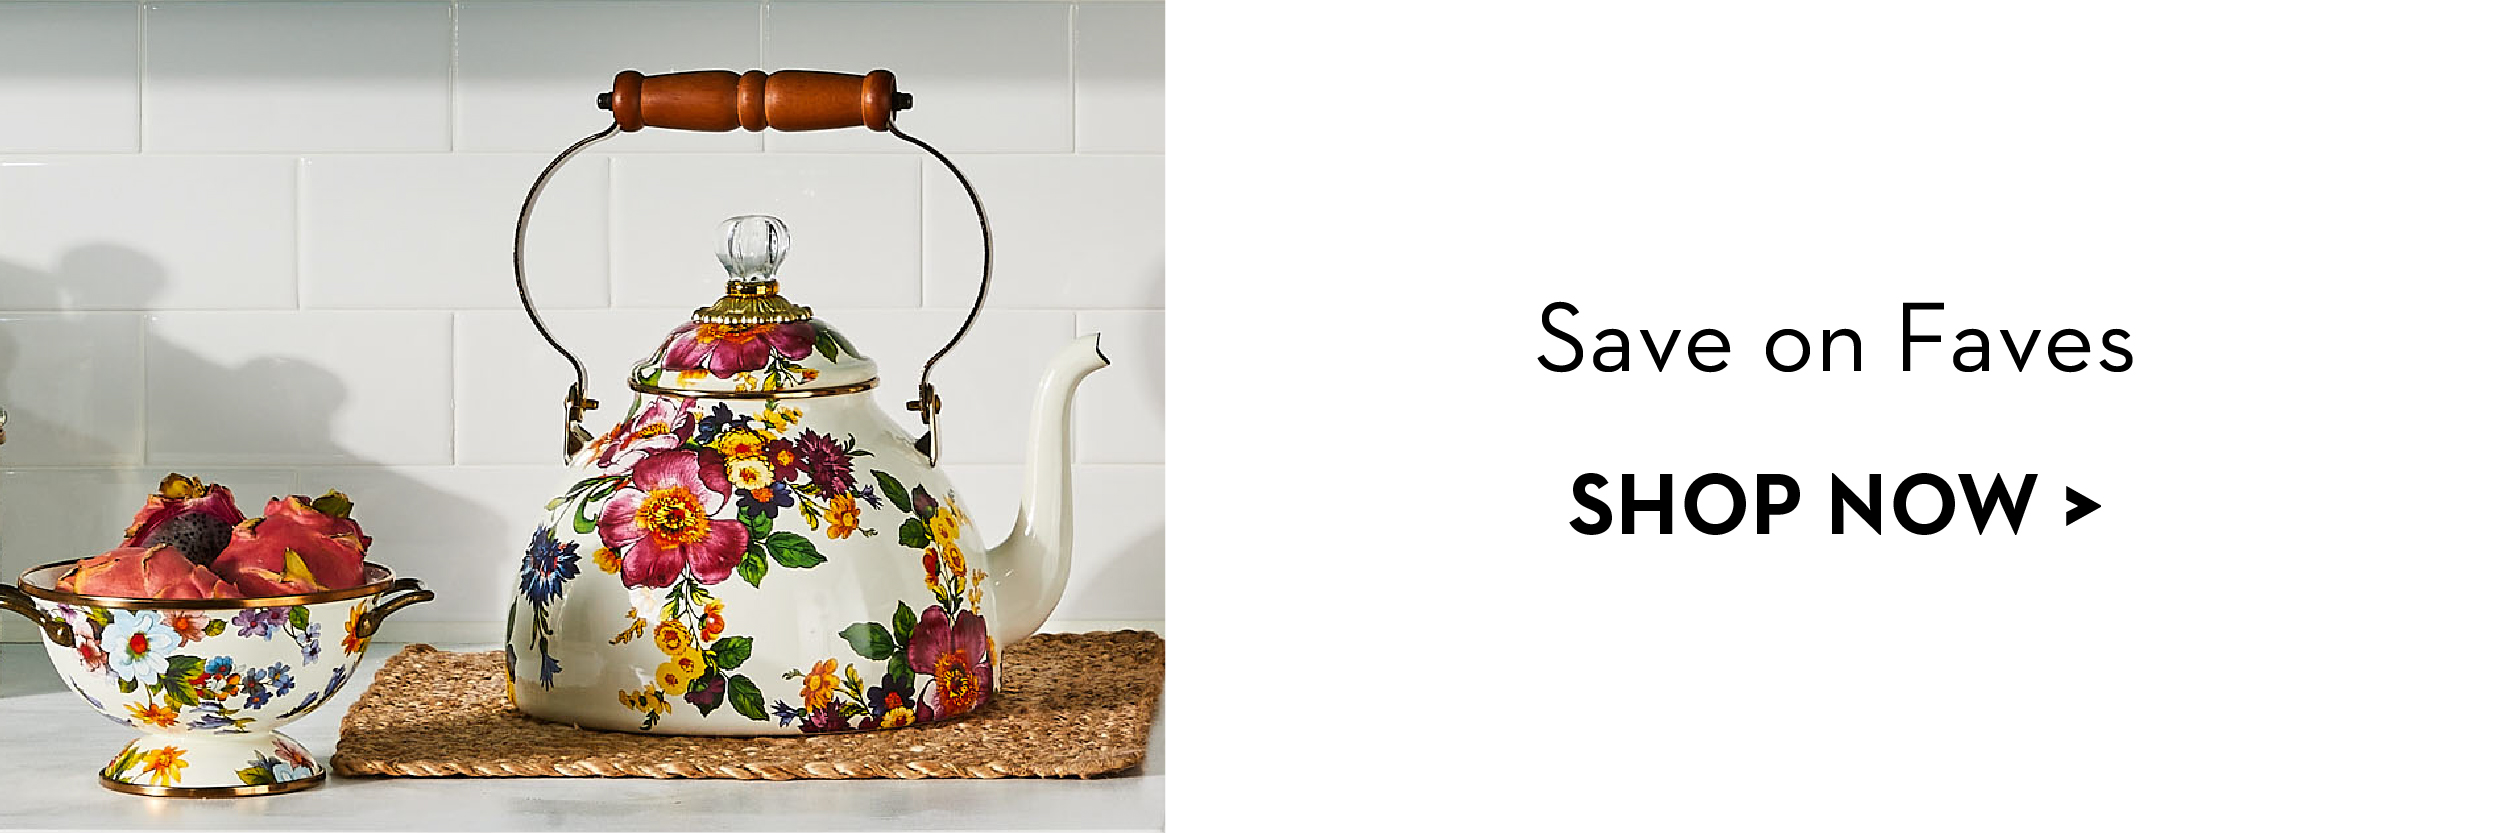 SAVE ON FAVES | SHOP NOW